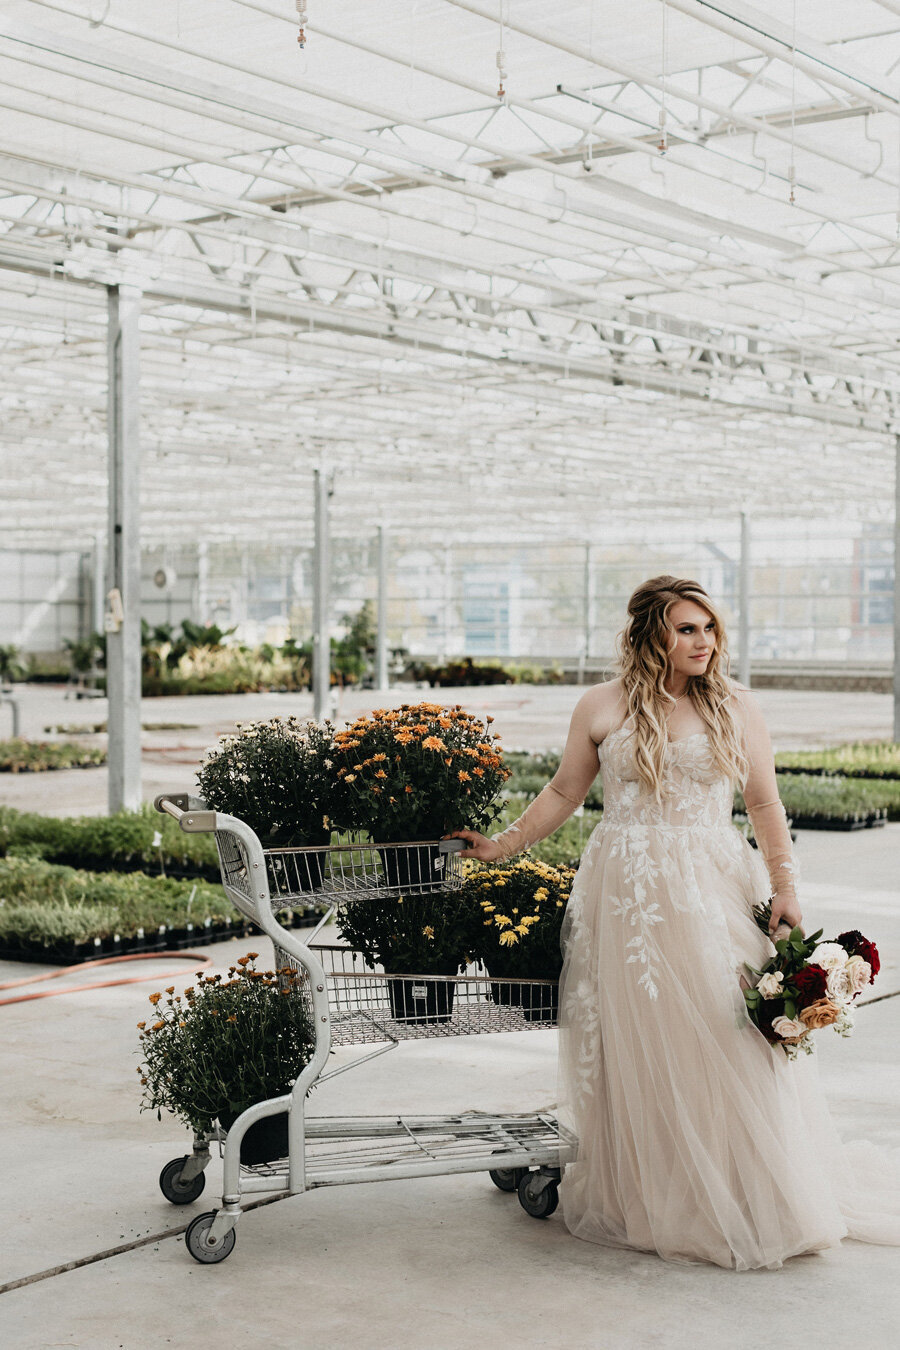 Bride in her wedding dress with her bouquet and a shopping cart of flowers.